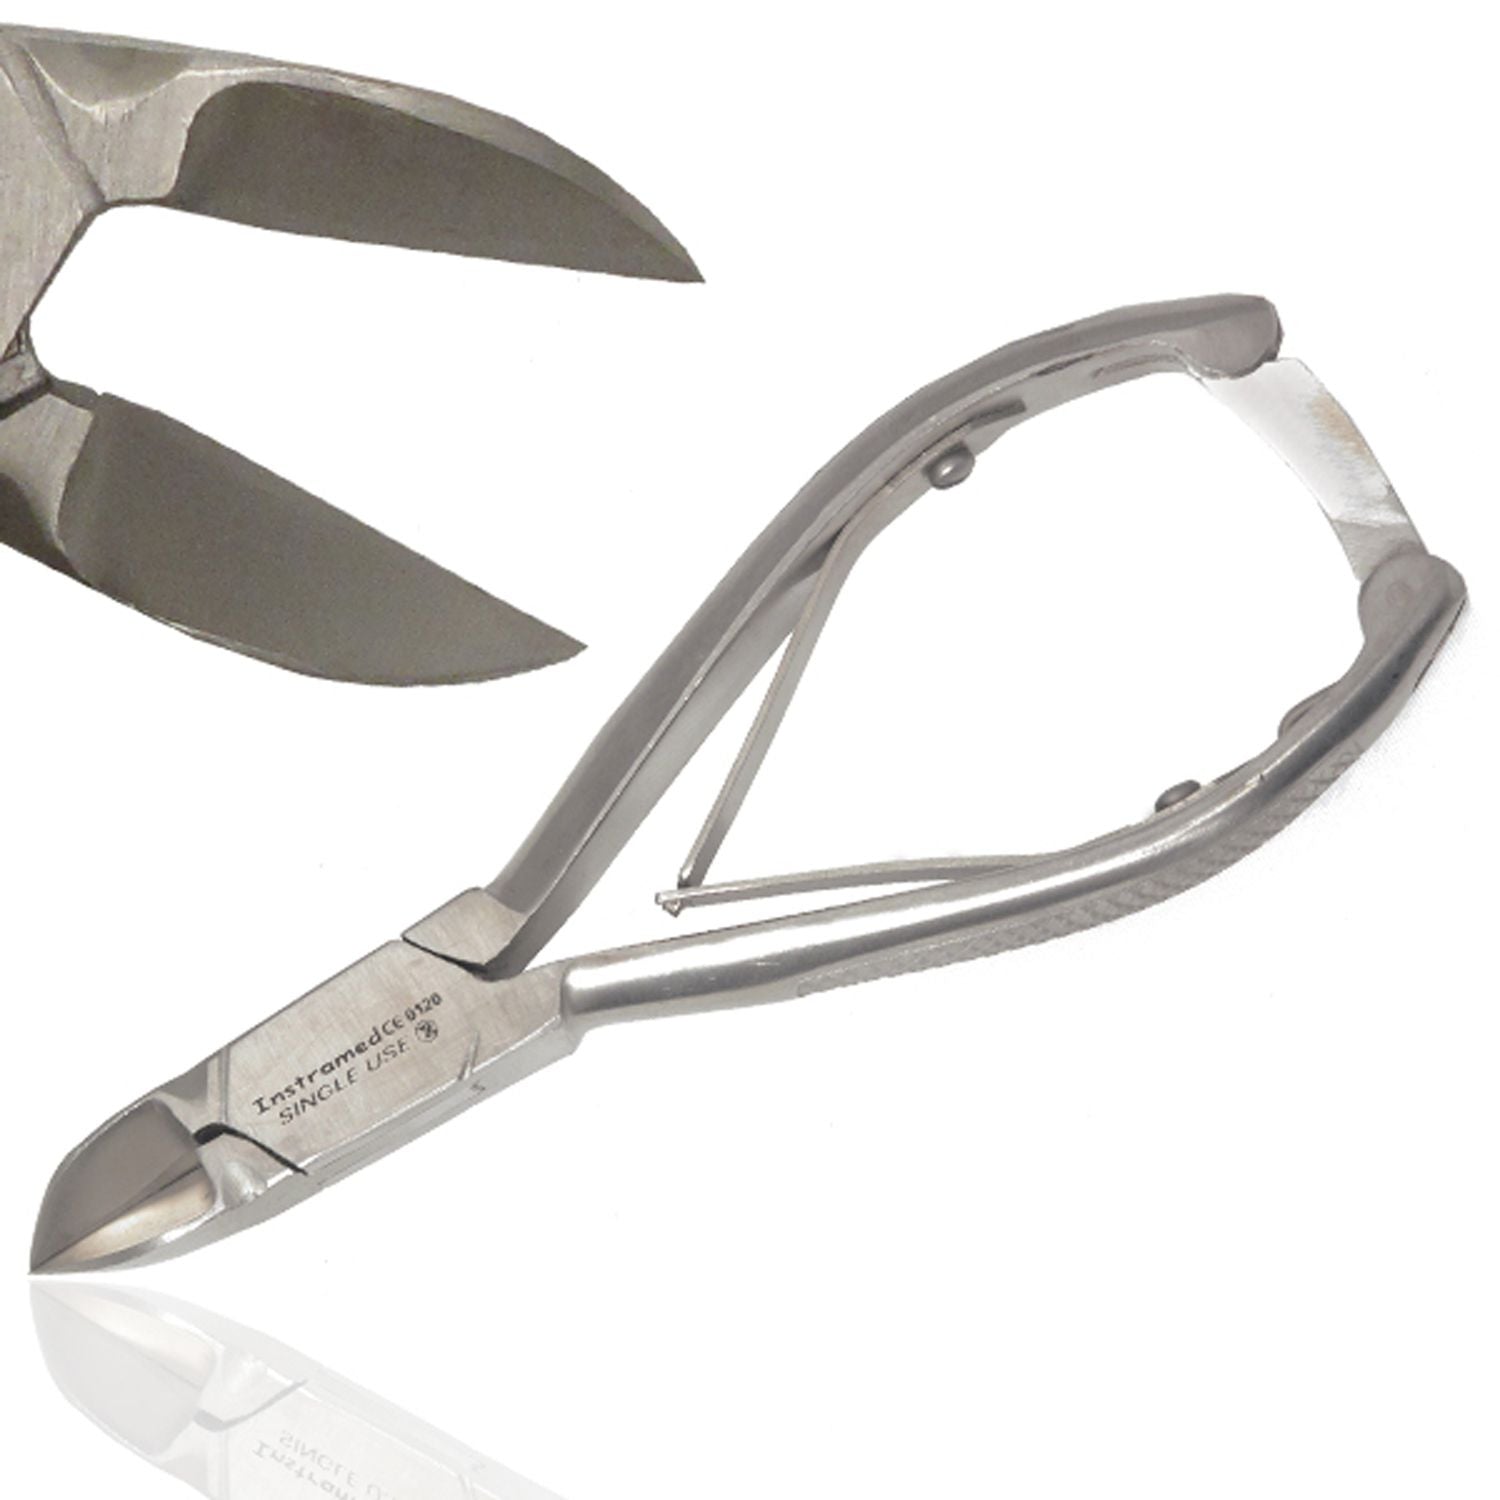 Instramed Nail Cutter with Clipper Blade & Handle Lock | 14cm | Single